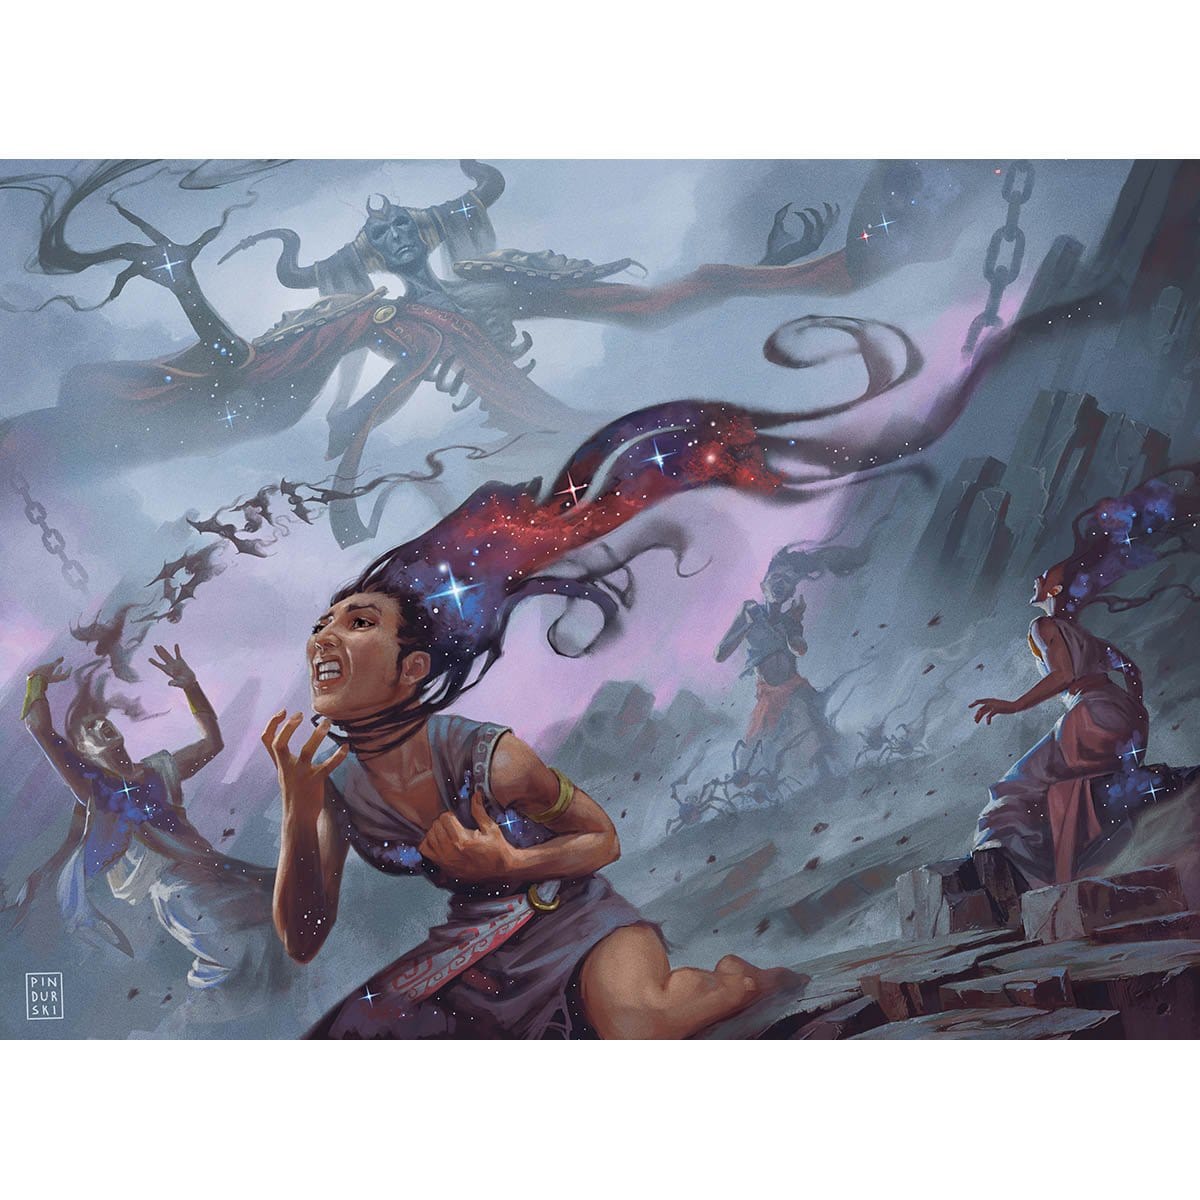 Underworld Dreams Print - Print - Original Magic Art - Accessories for Magic the Gathering and other card games